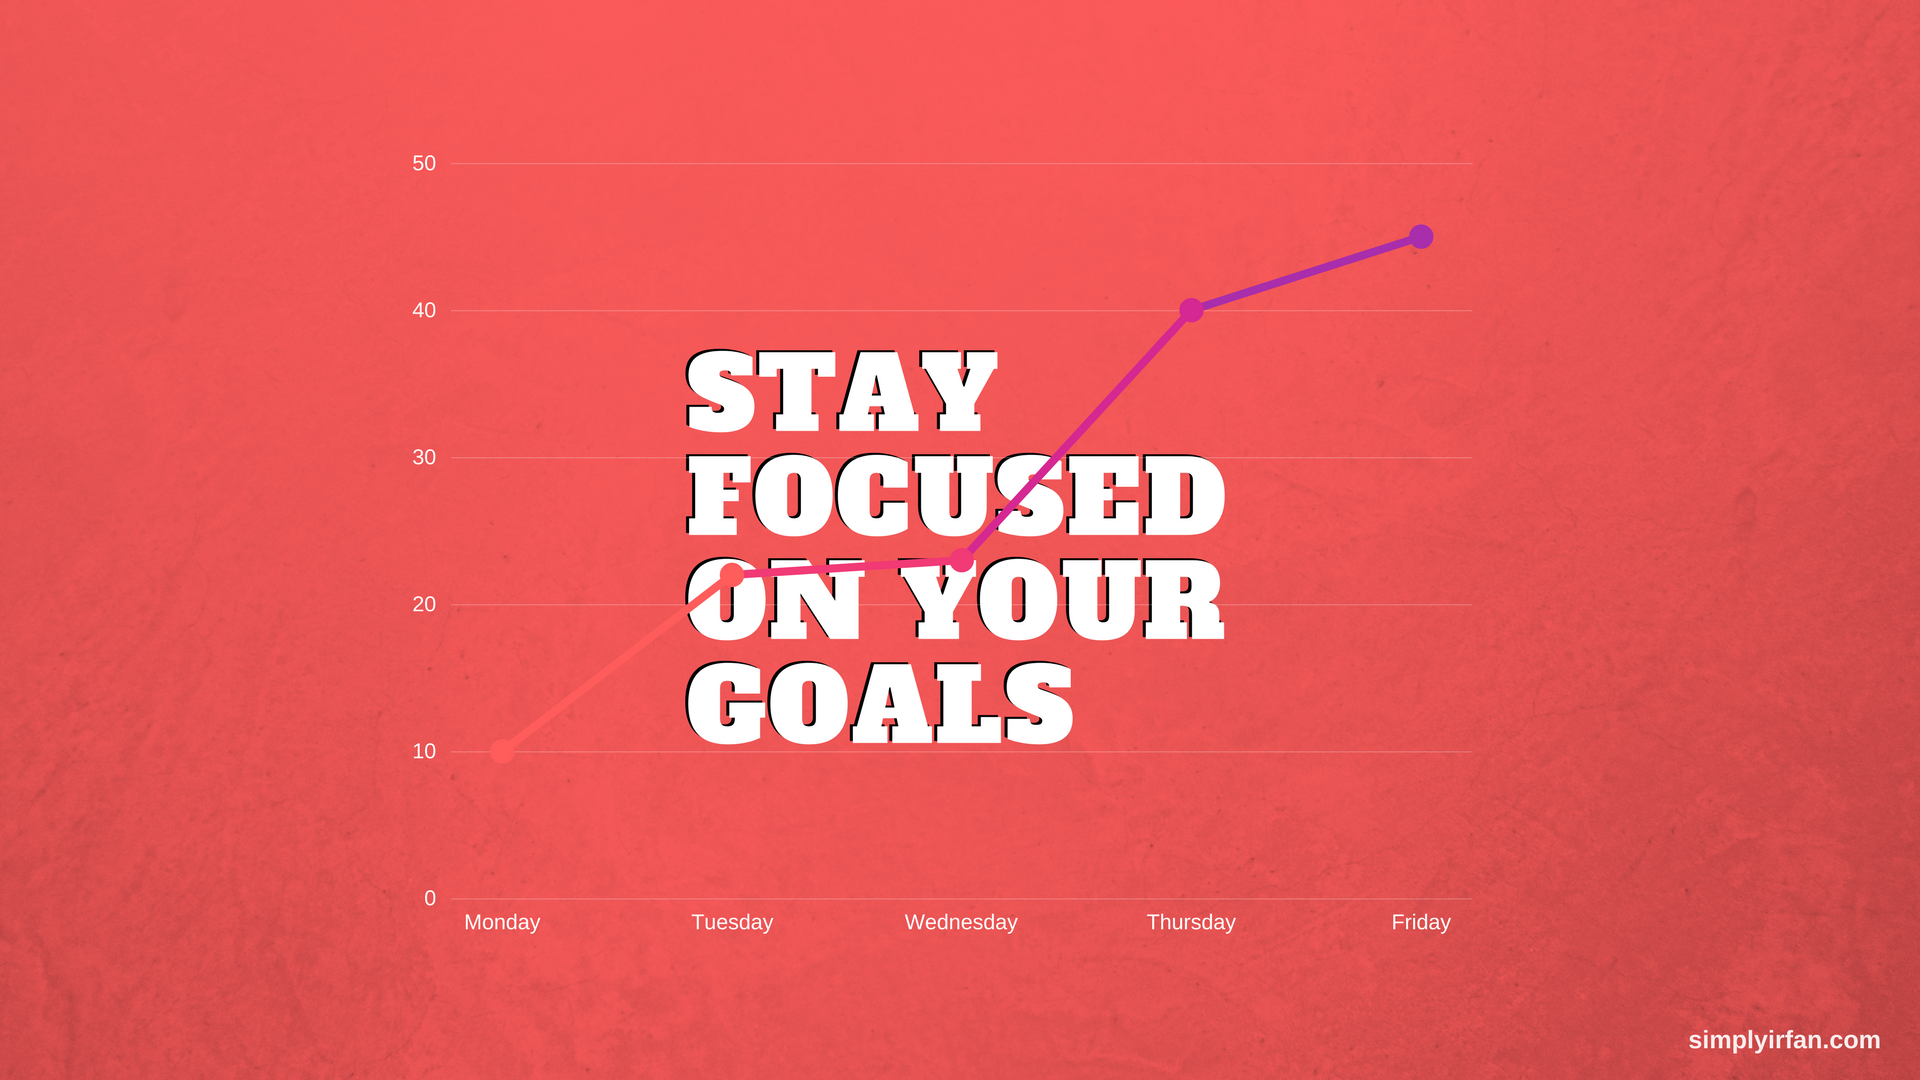 Stay Focused on Your Goals desktop PC and Mac wallpaper